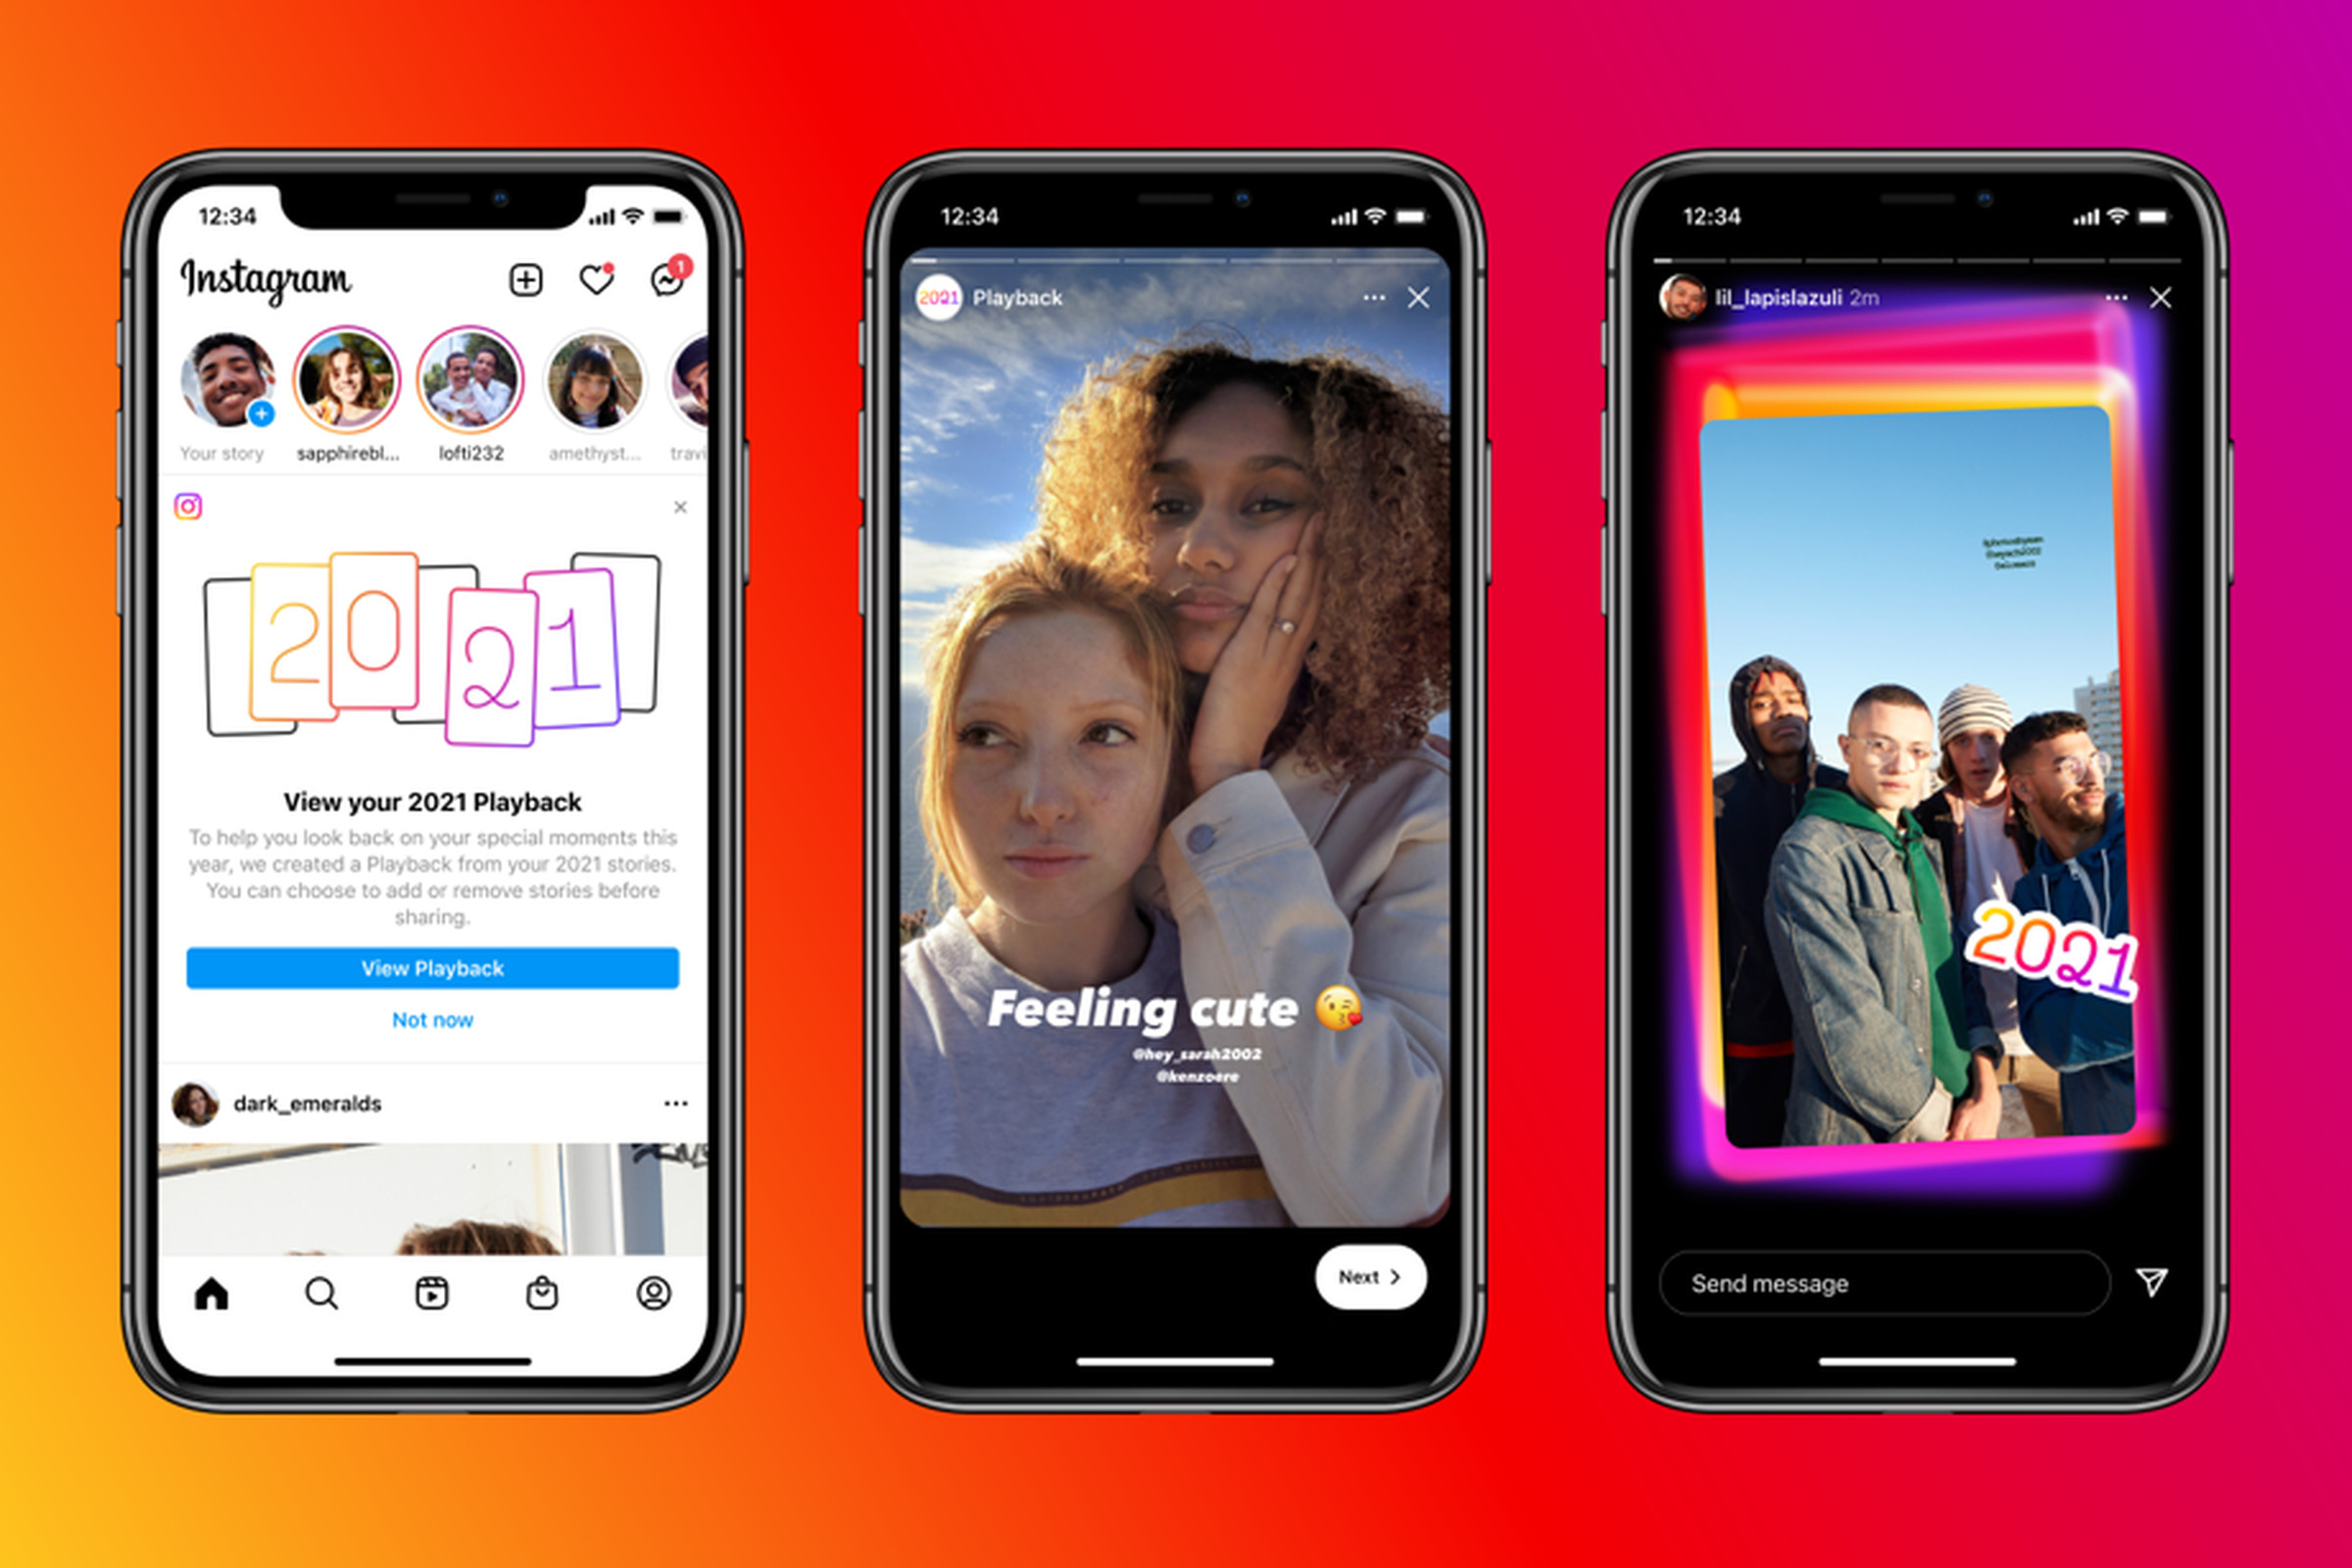 Instagram’s Playback will show your favorite stories from 2021